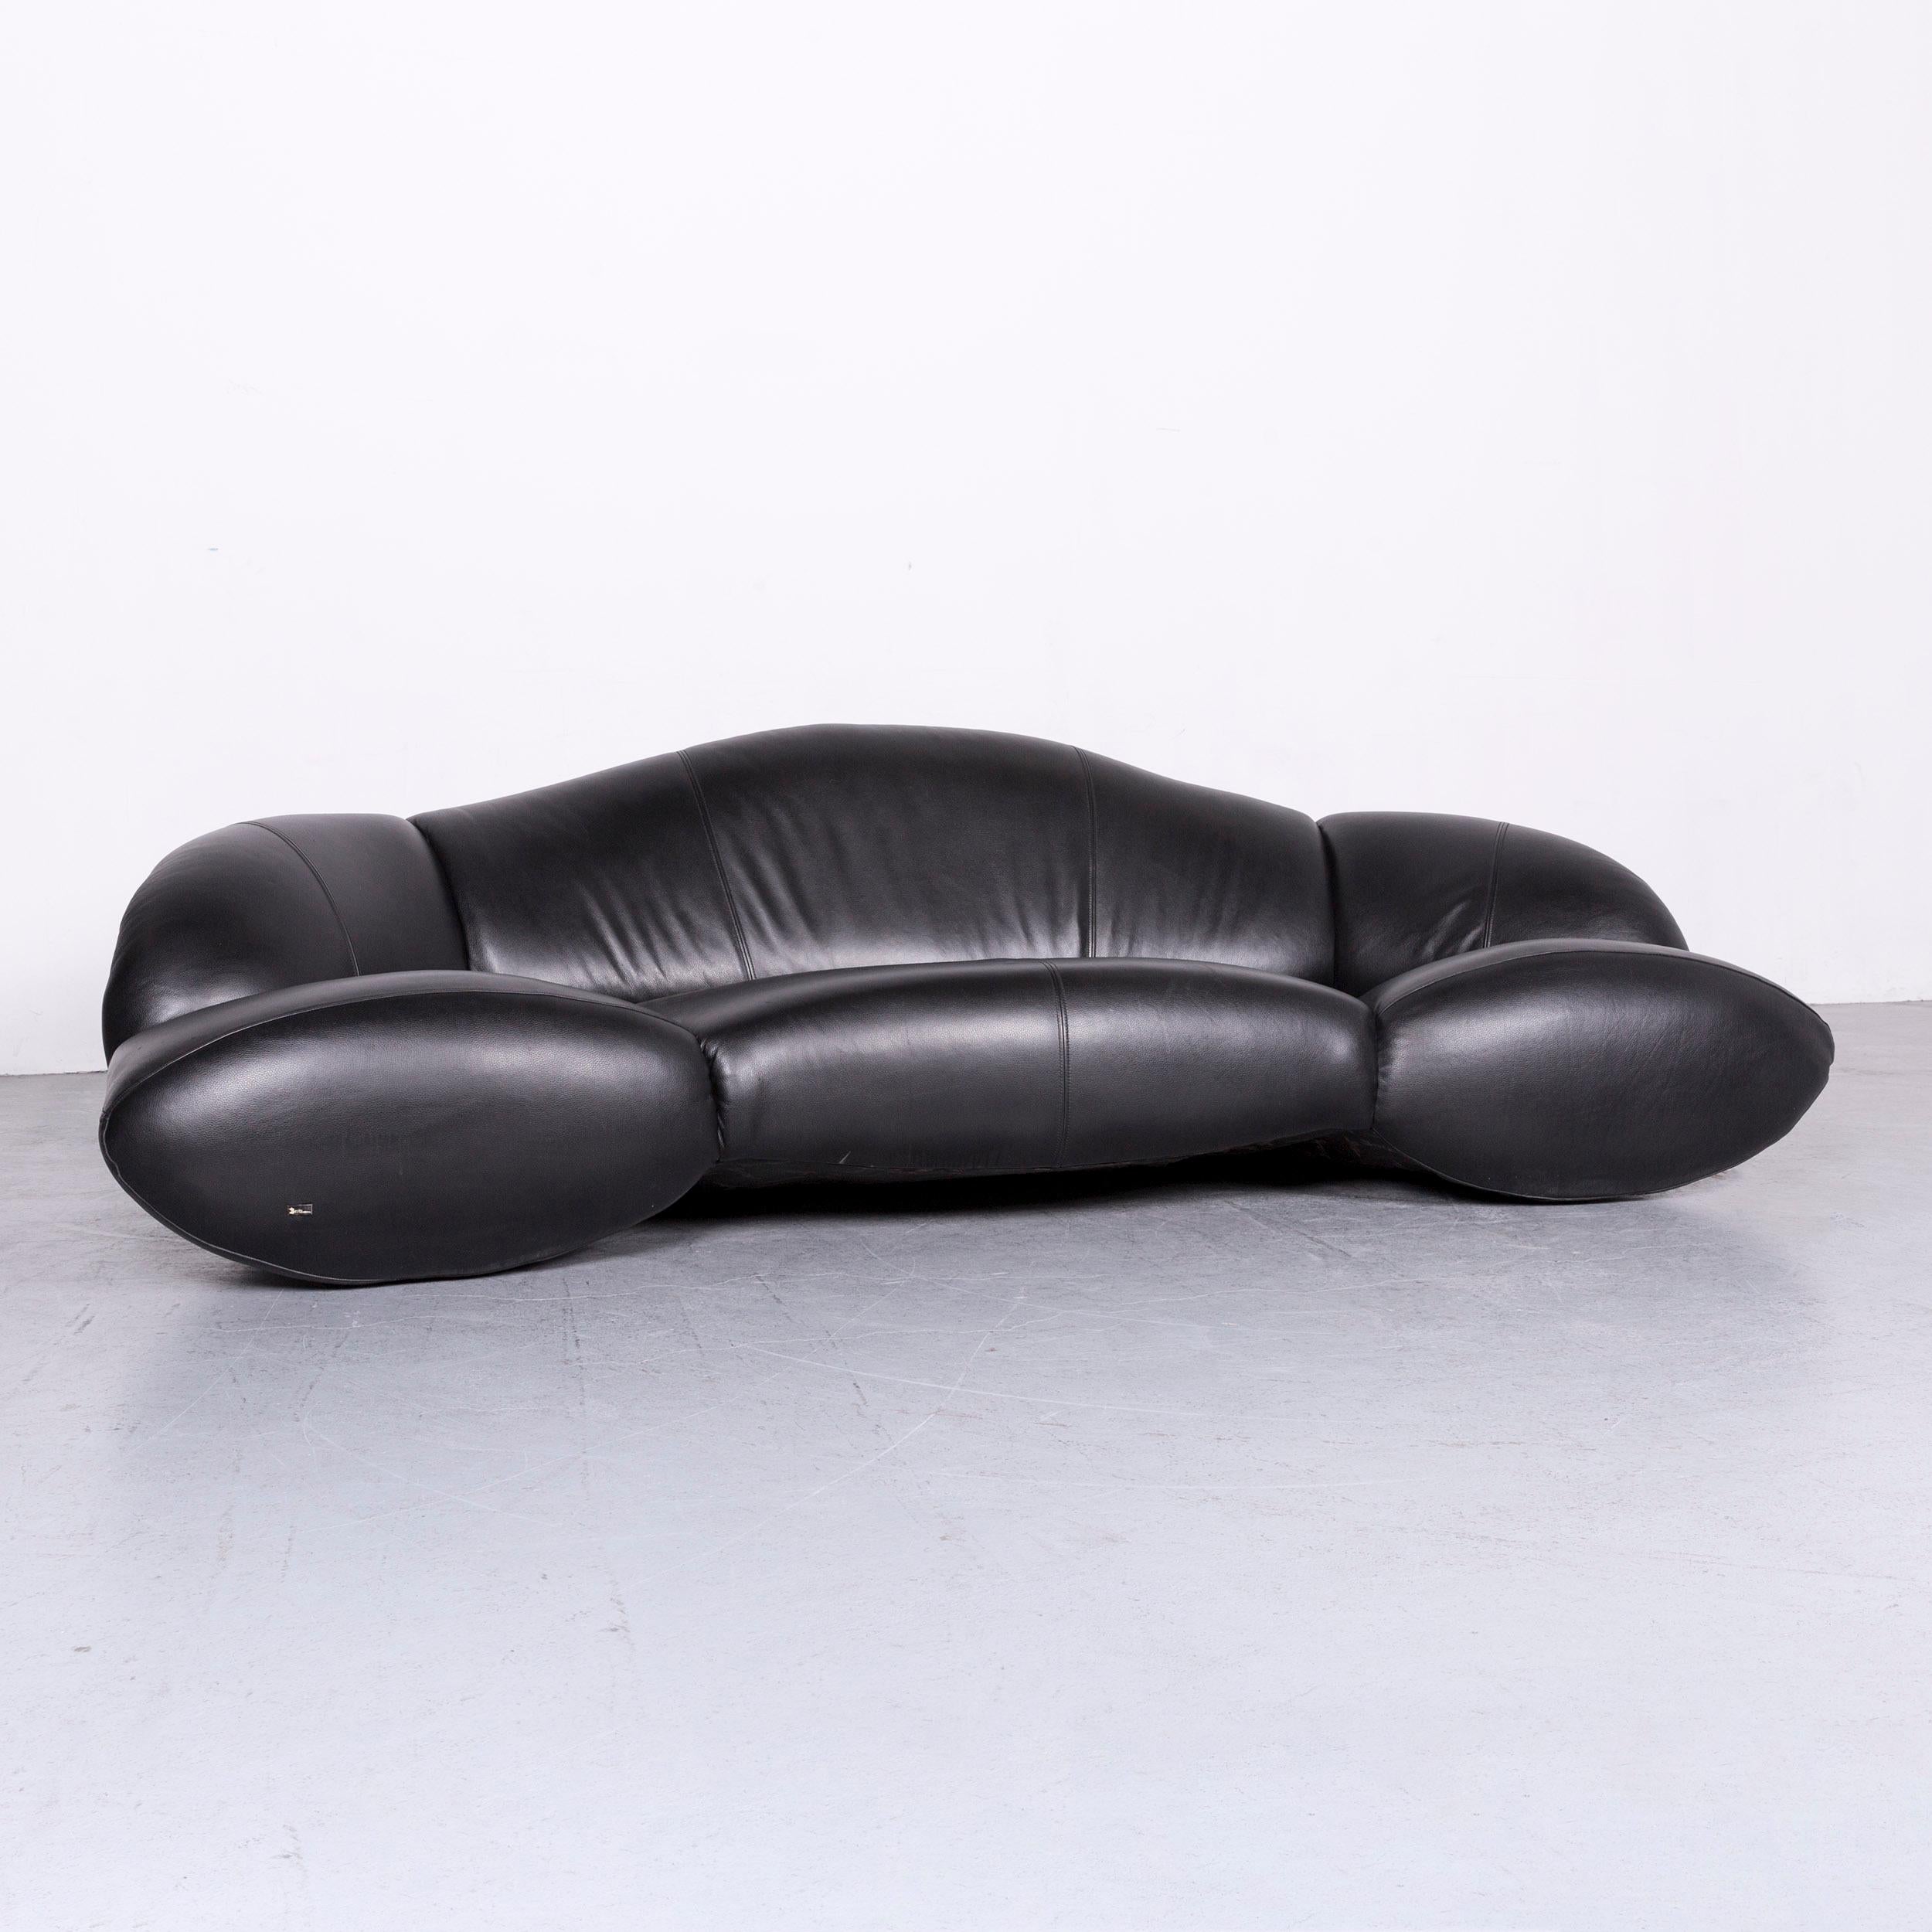 We bring to you a Bretz Mumba designer leather sofa black three-seat couch.

















